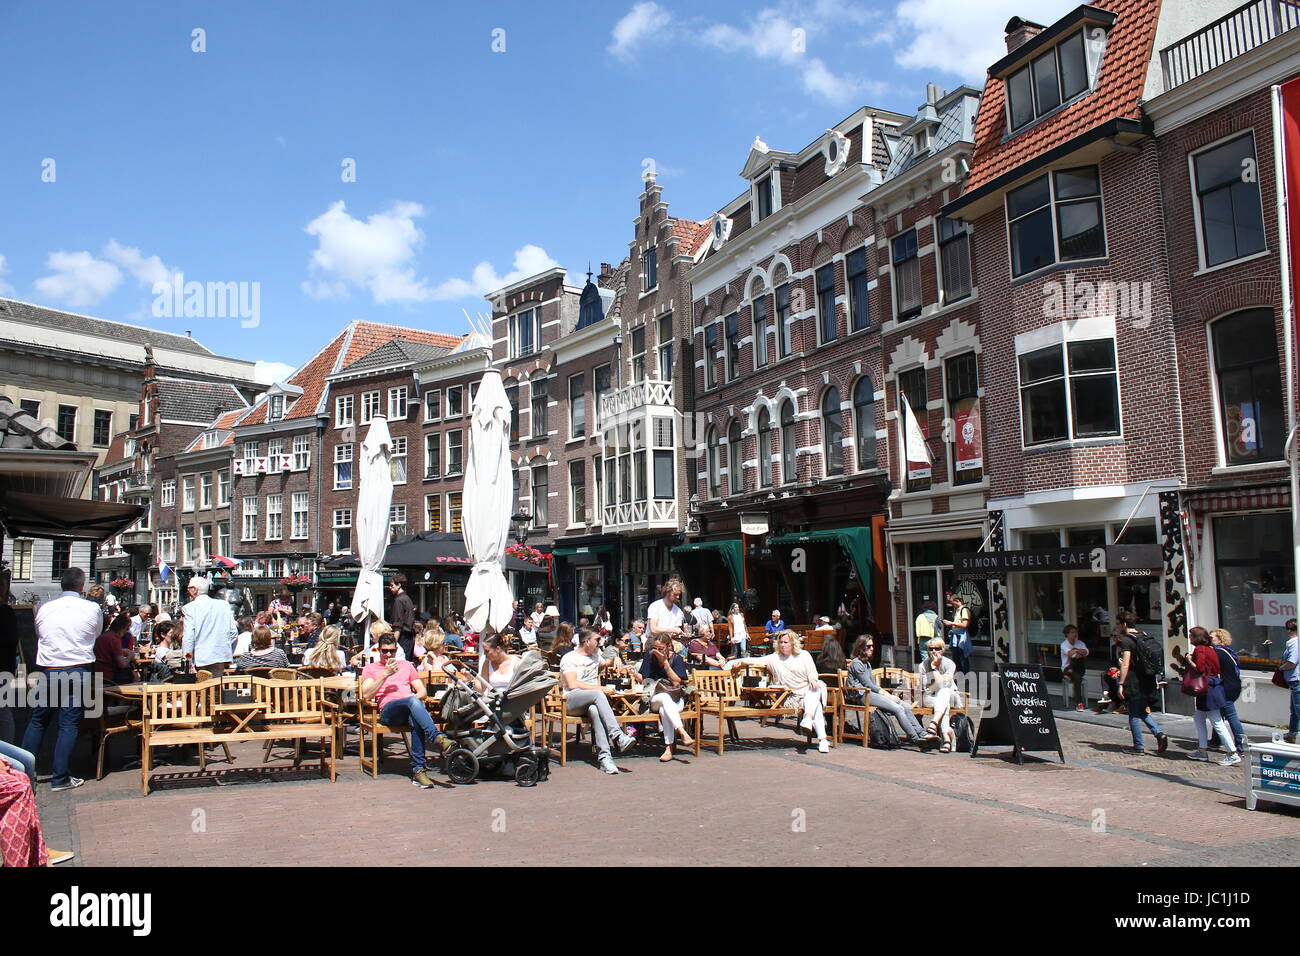 Busy terrace on a warm spring day at Vismarkt square, central Utrecht, The Netherlands. Stock Photo